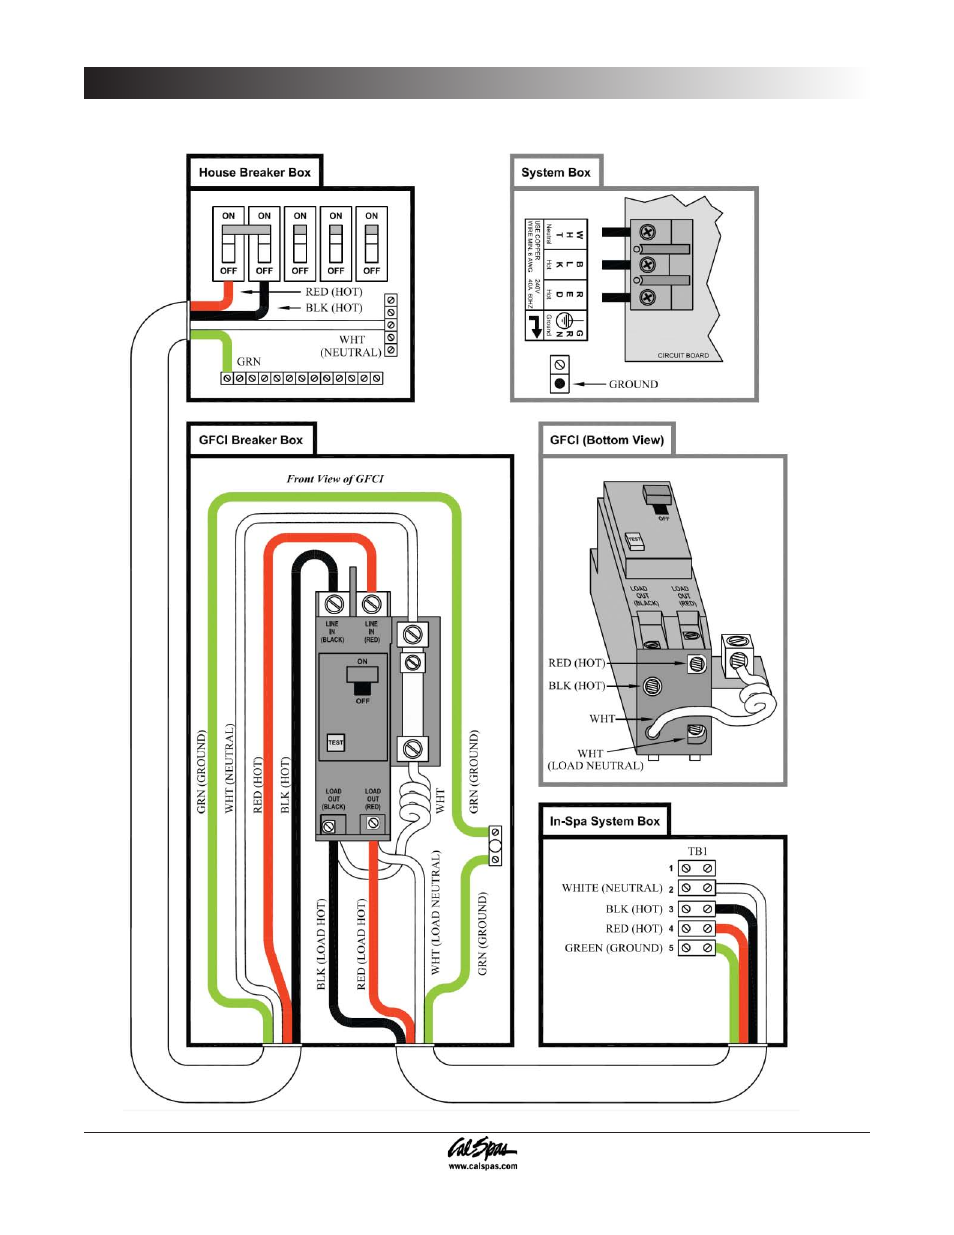 Gfci wiring diagram, Preparing for your new portable spa | Cal Spas